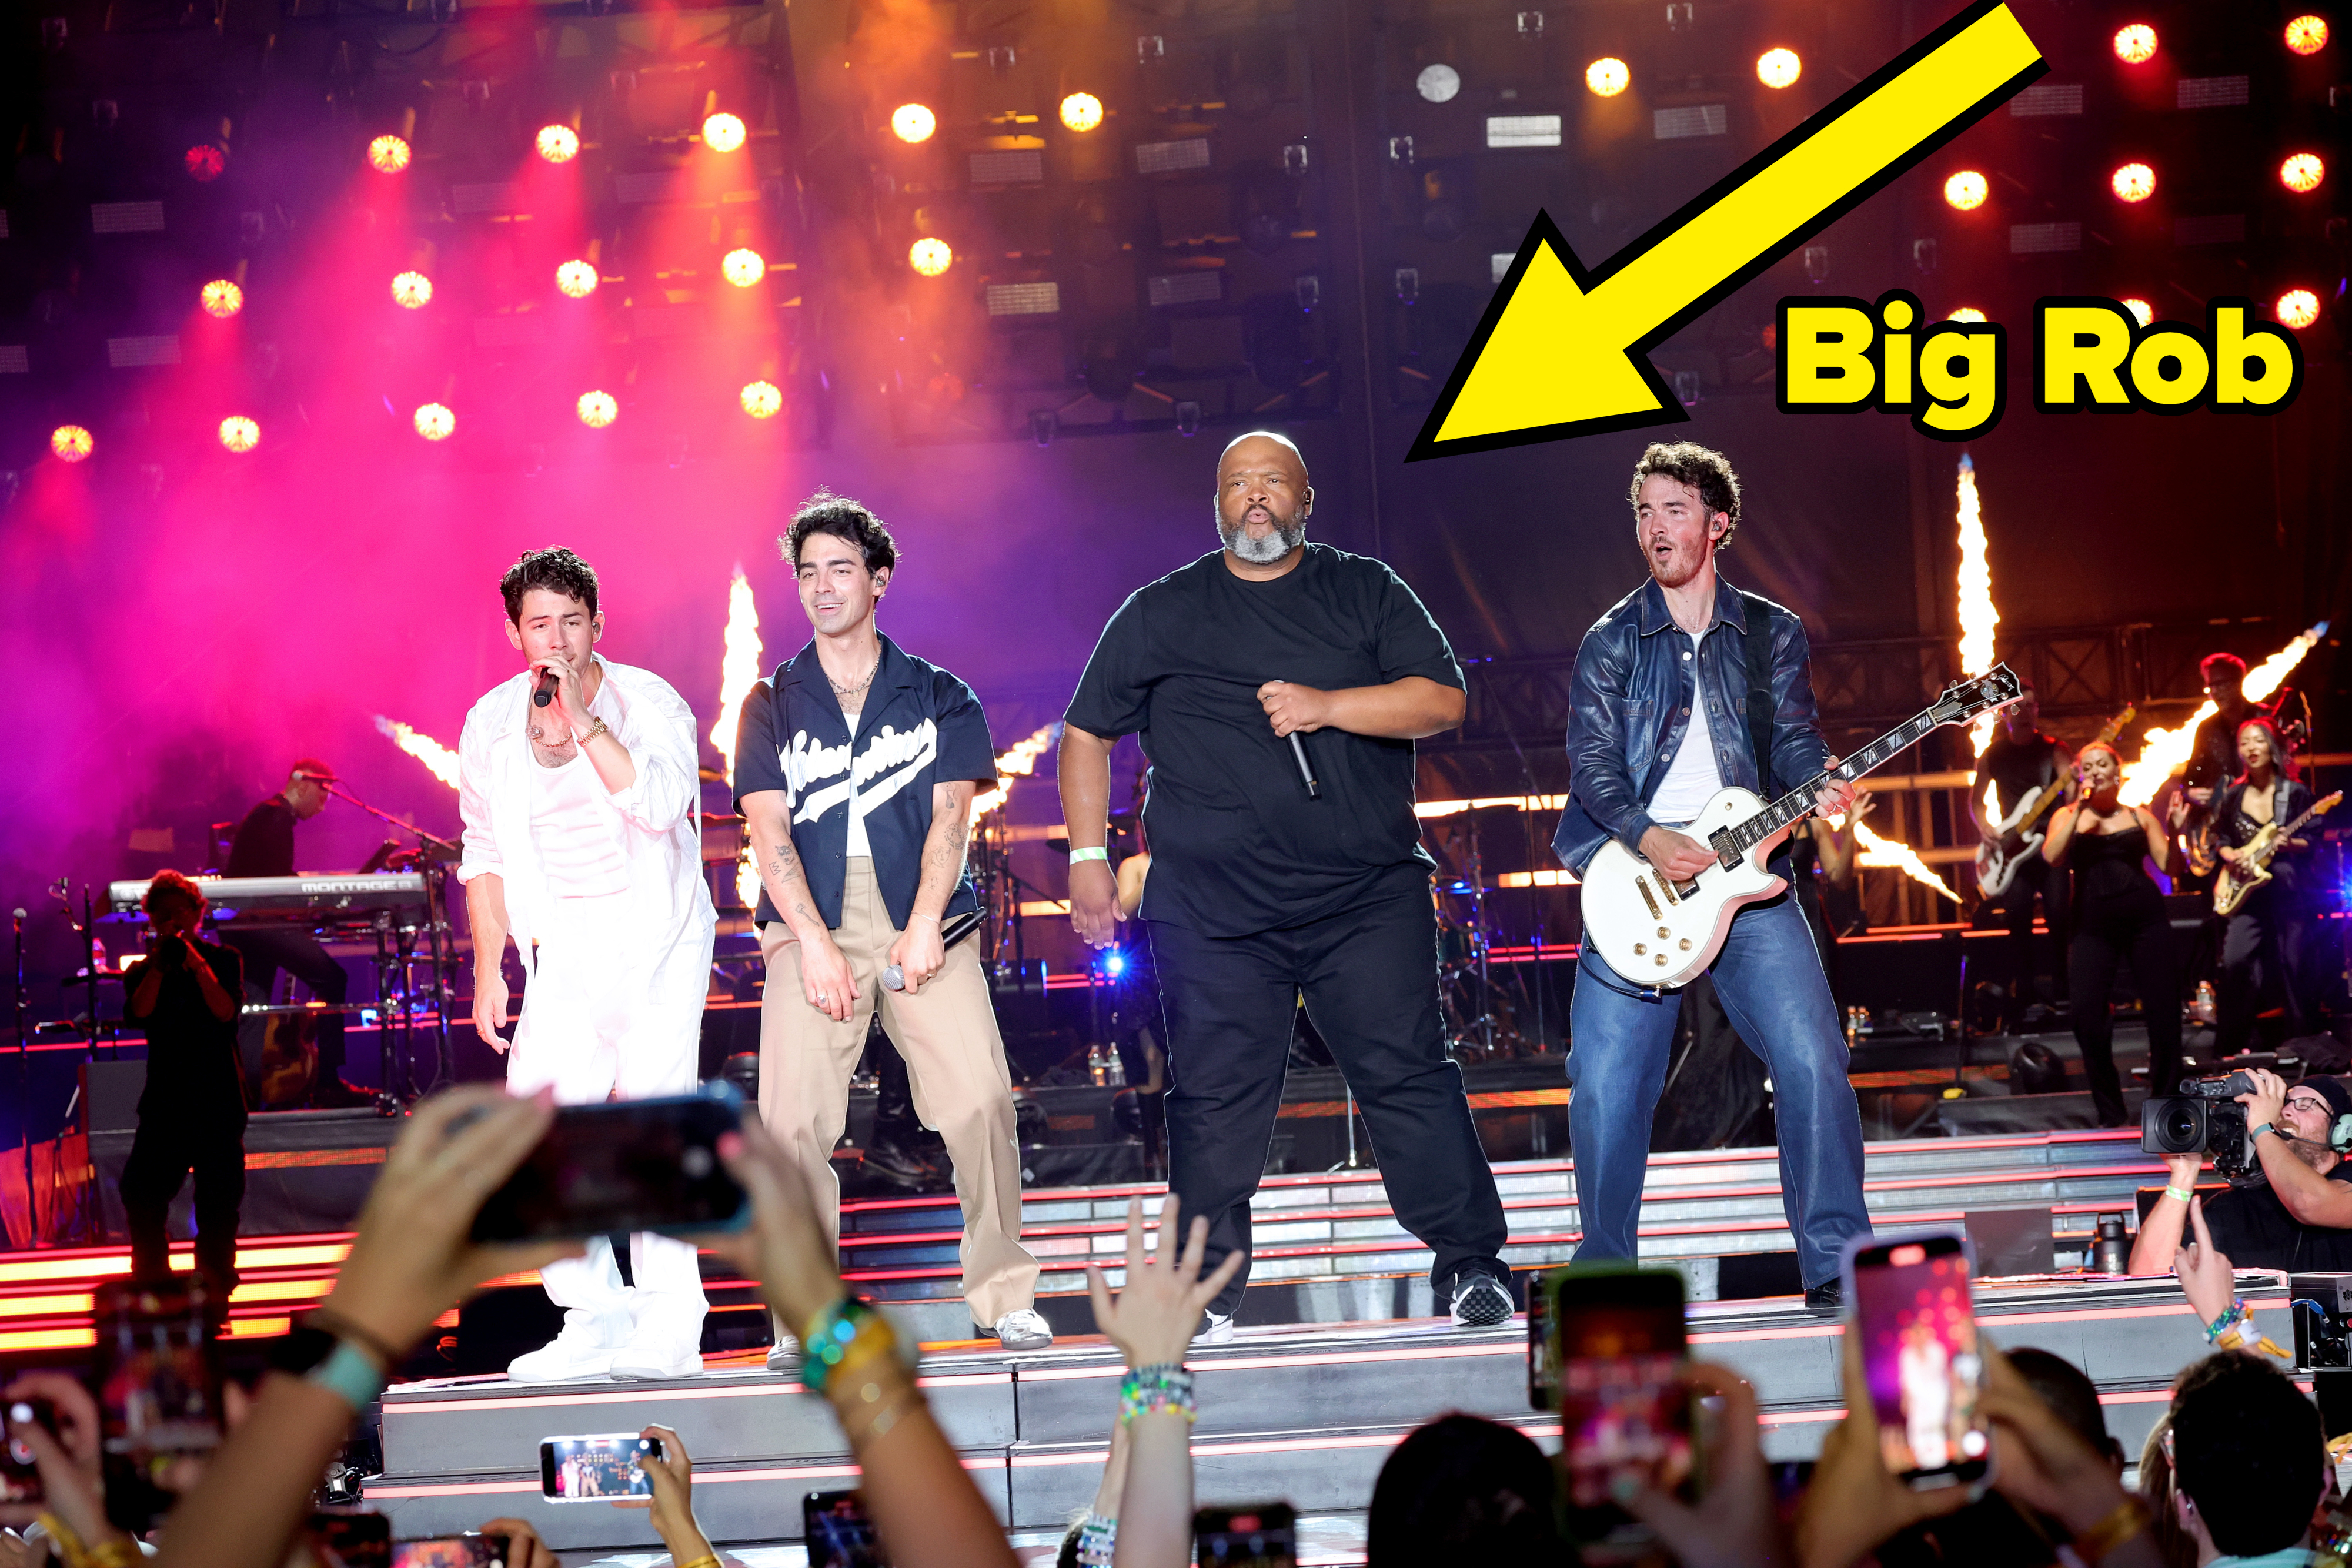 Big Rob onstage with The Jonas Brothers